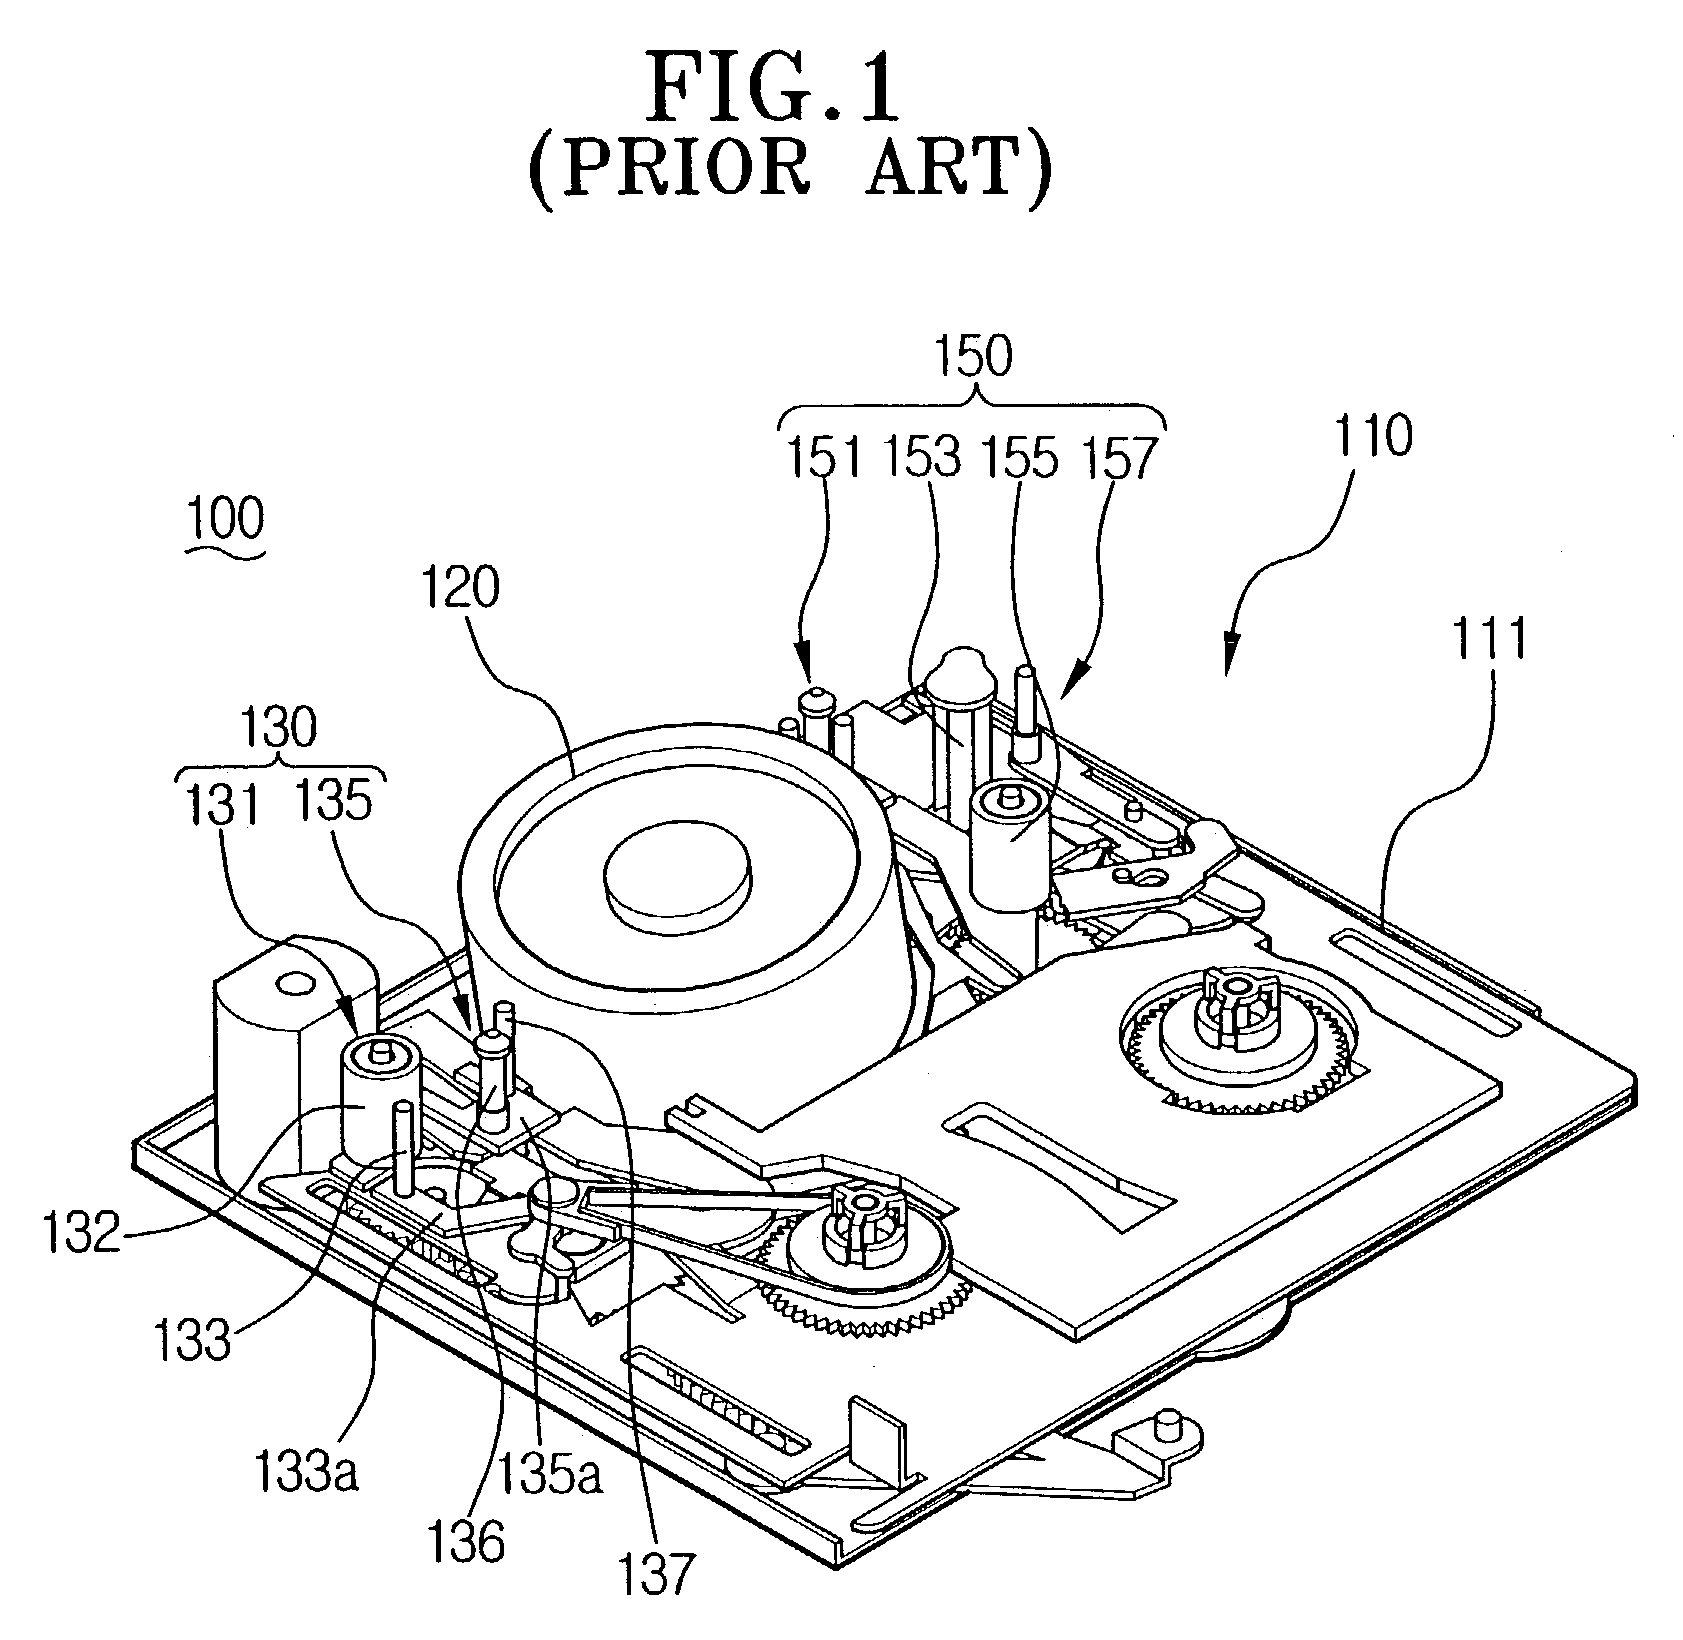 Magnetic tape guiding device for use with a tape transport system of a tape recorder and method for using the same